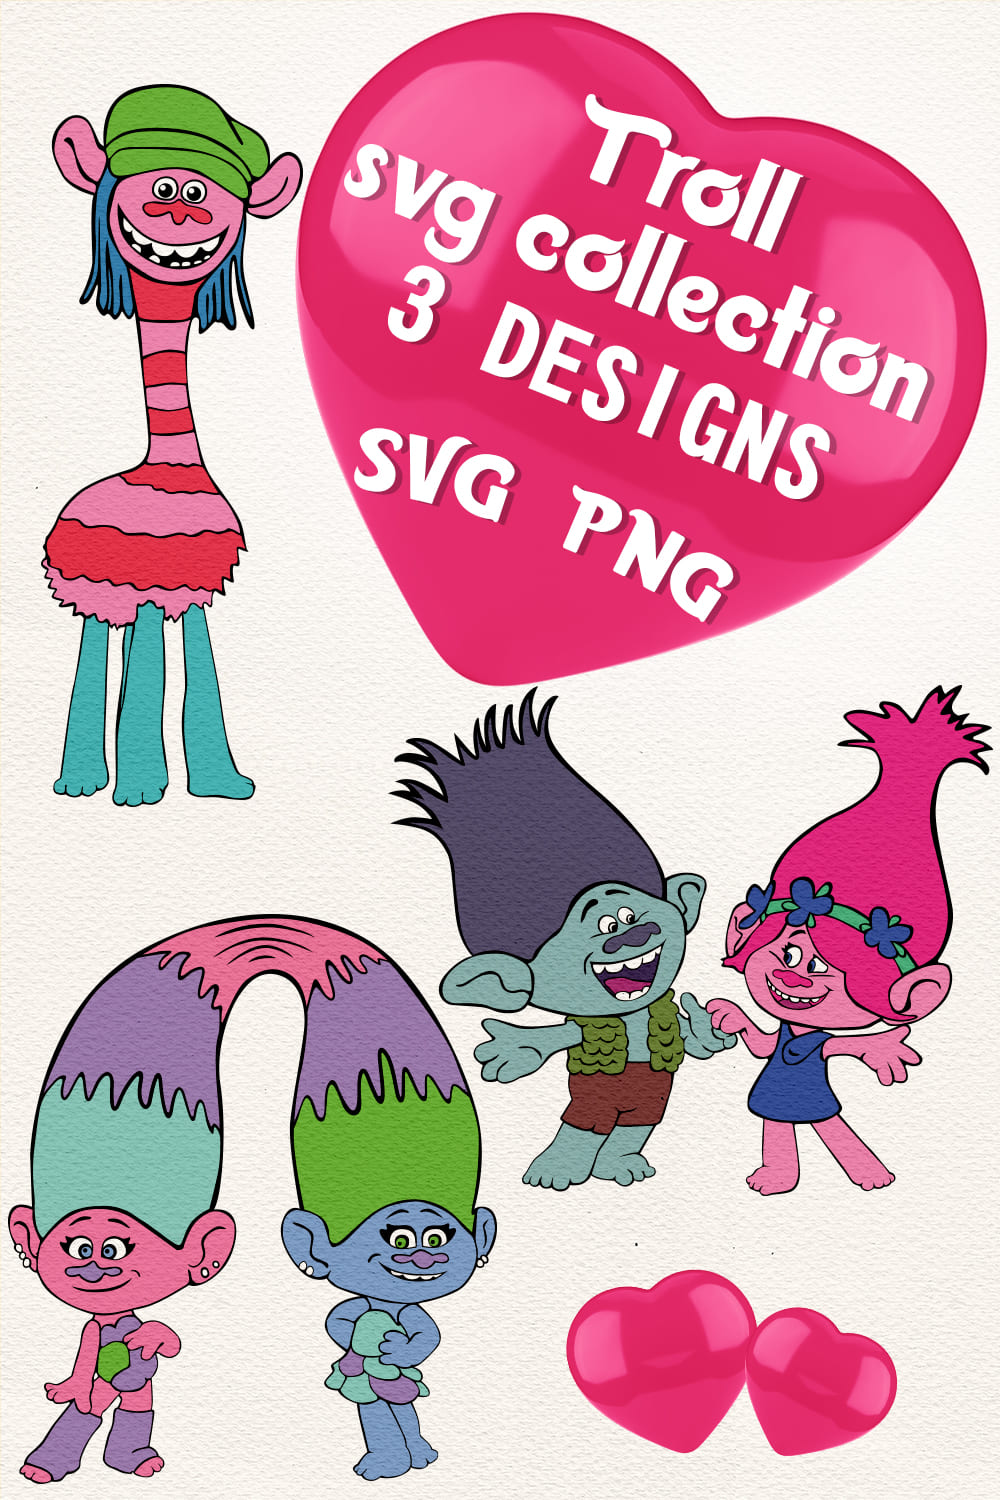 troll svg collection pinterest image.